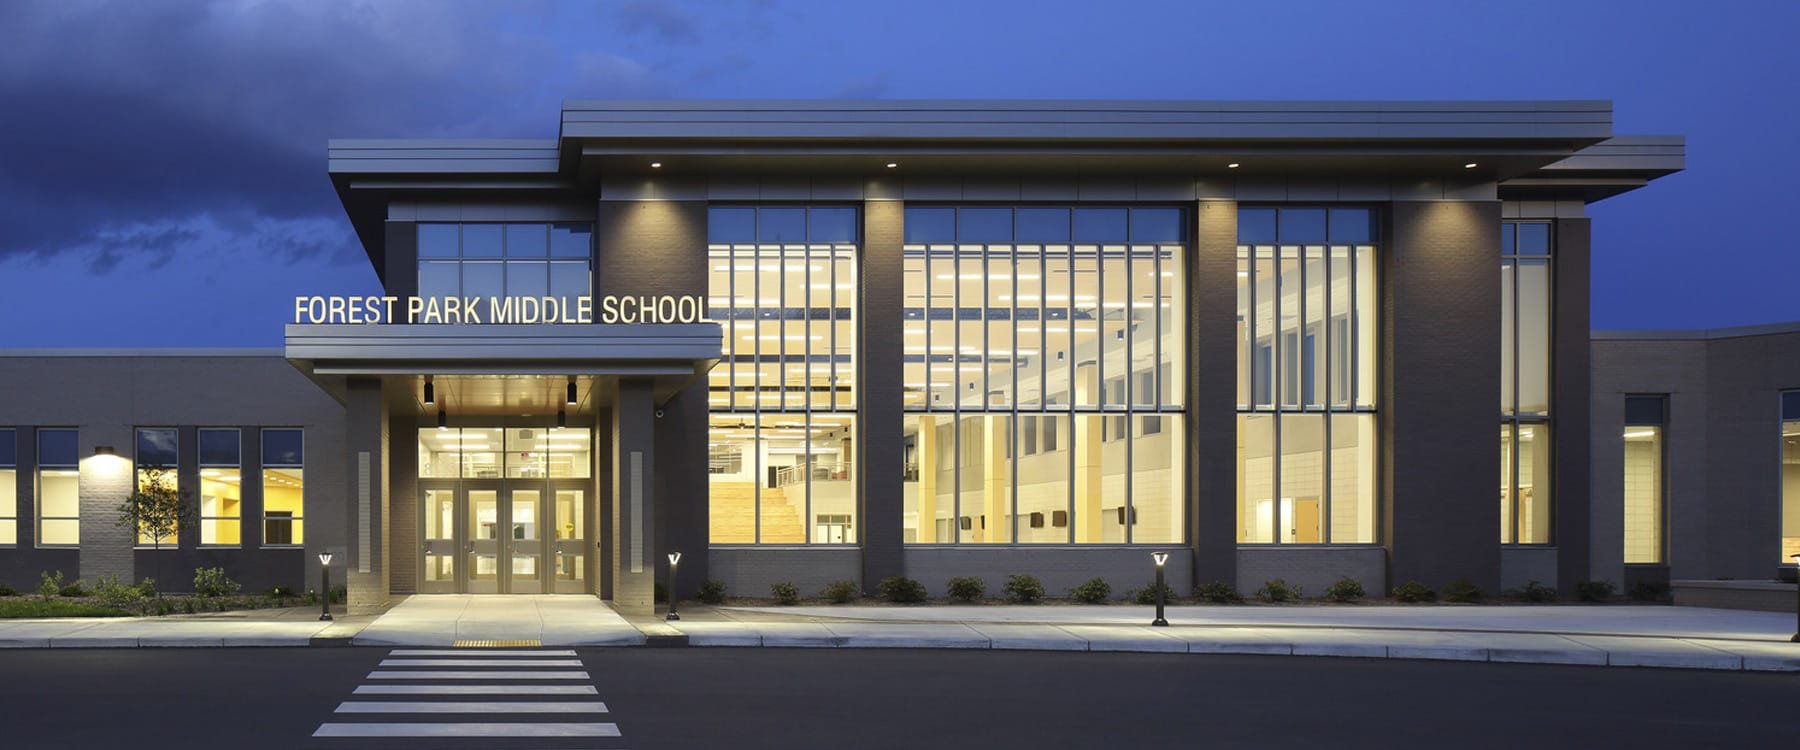 Forest Park Middle School is a new middle school in Franklin Public School Where School Design Meets Curriculum